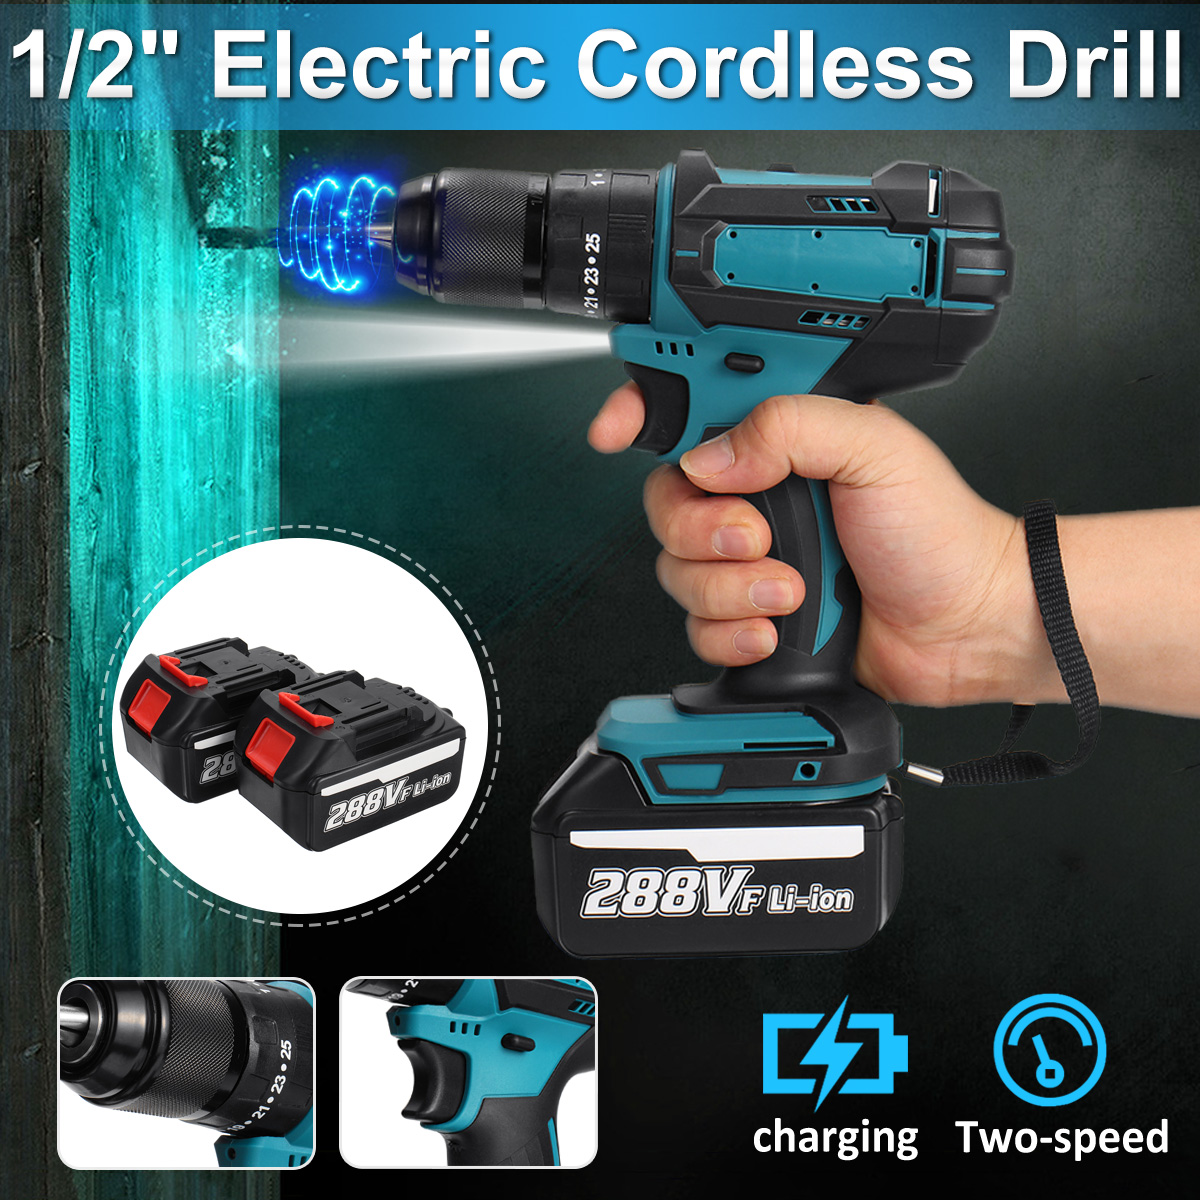 13mm-800W-Cordless-Brushless-Impact-Drill-Driver-253-Torque-Electric-Drill-Screwdriver-For-Makita-18-1880979-3